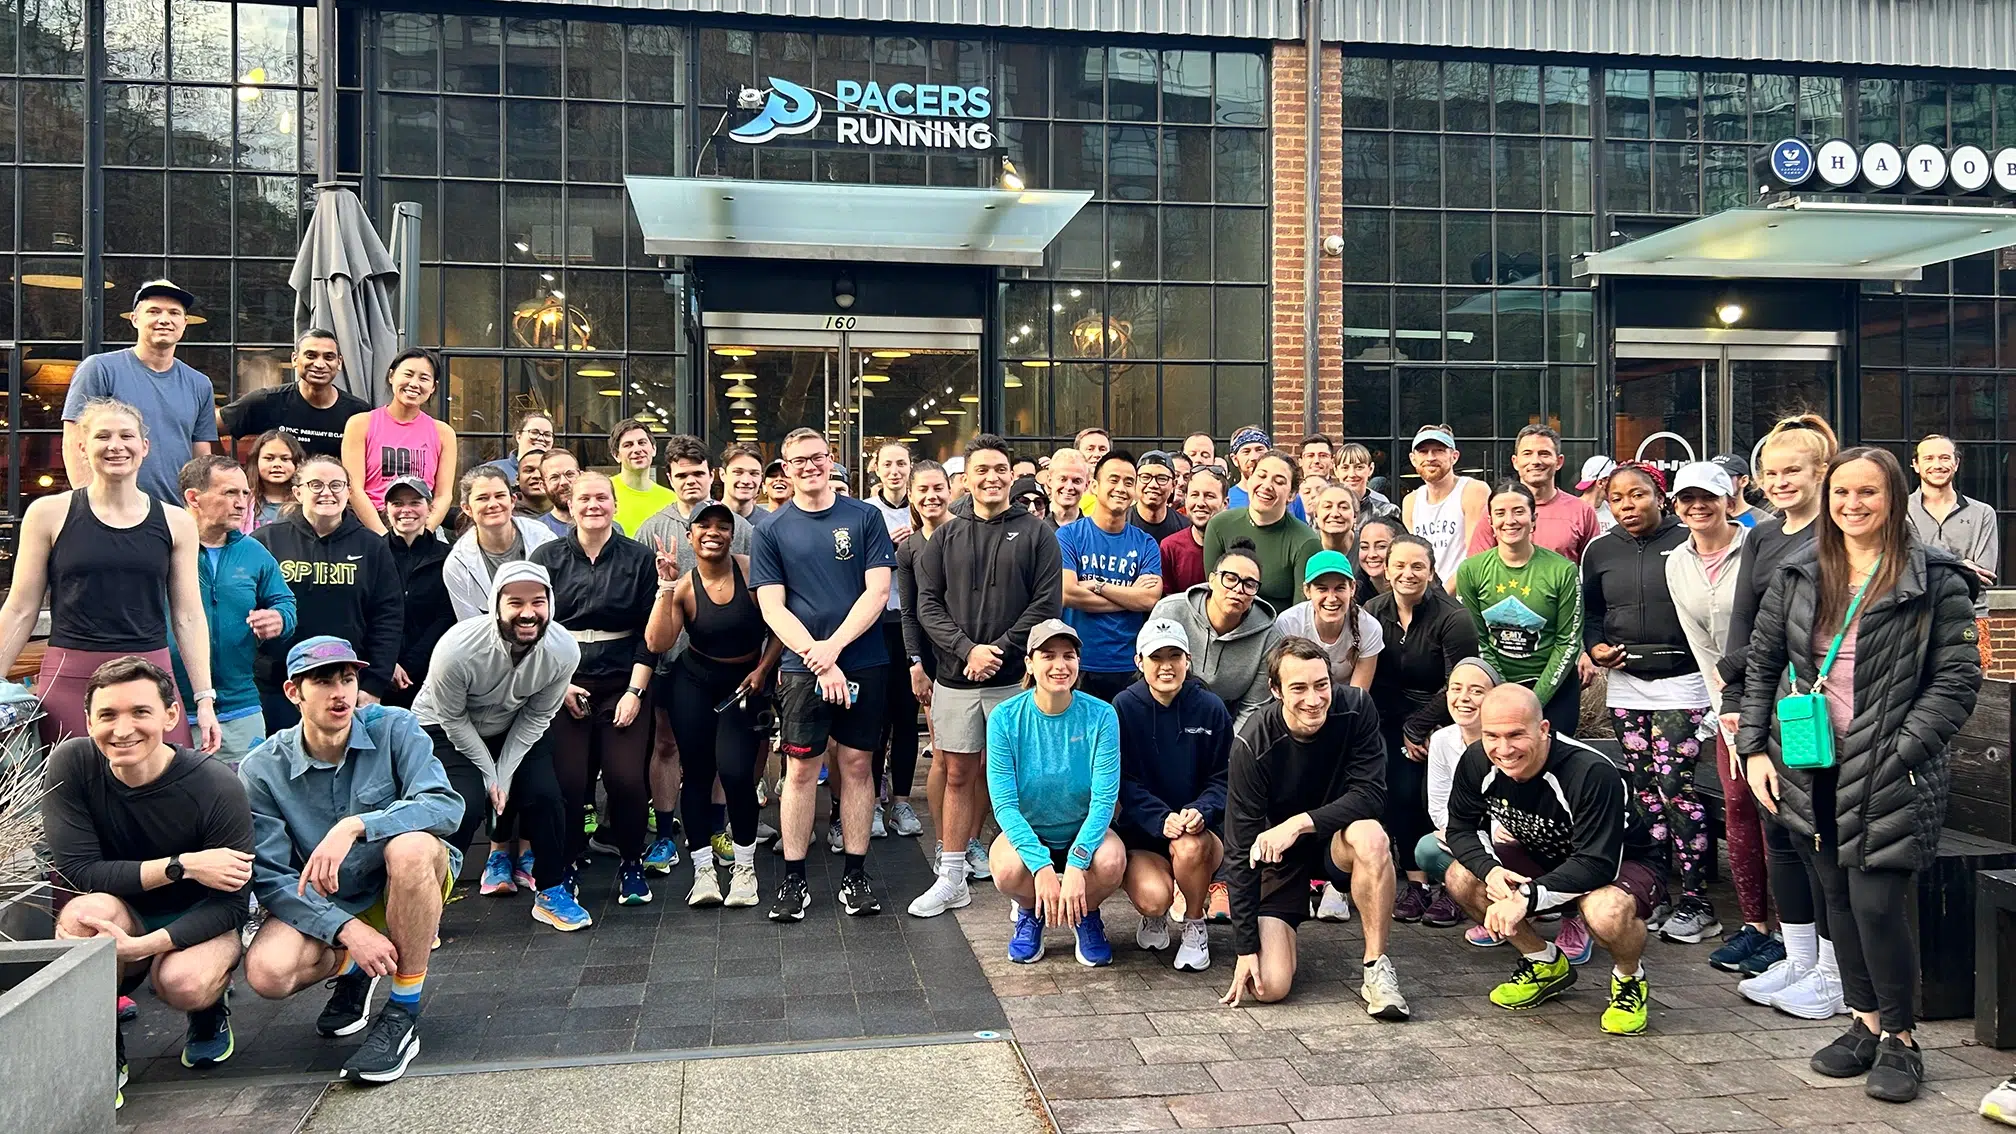 A group of diverse people in running shoes, tank tops, shirts, tights, and shorts pose for a photo in front of a Pacers Running store.